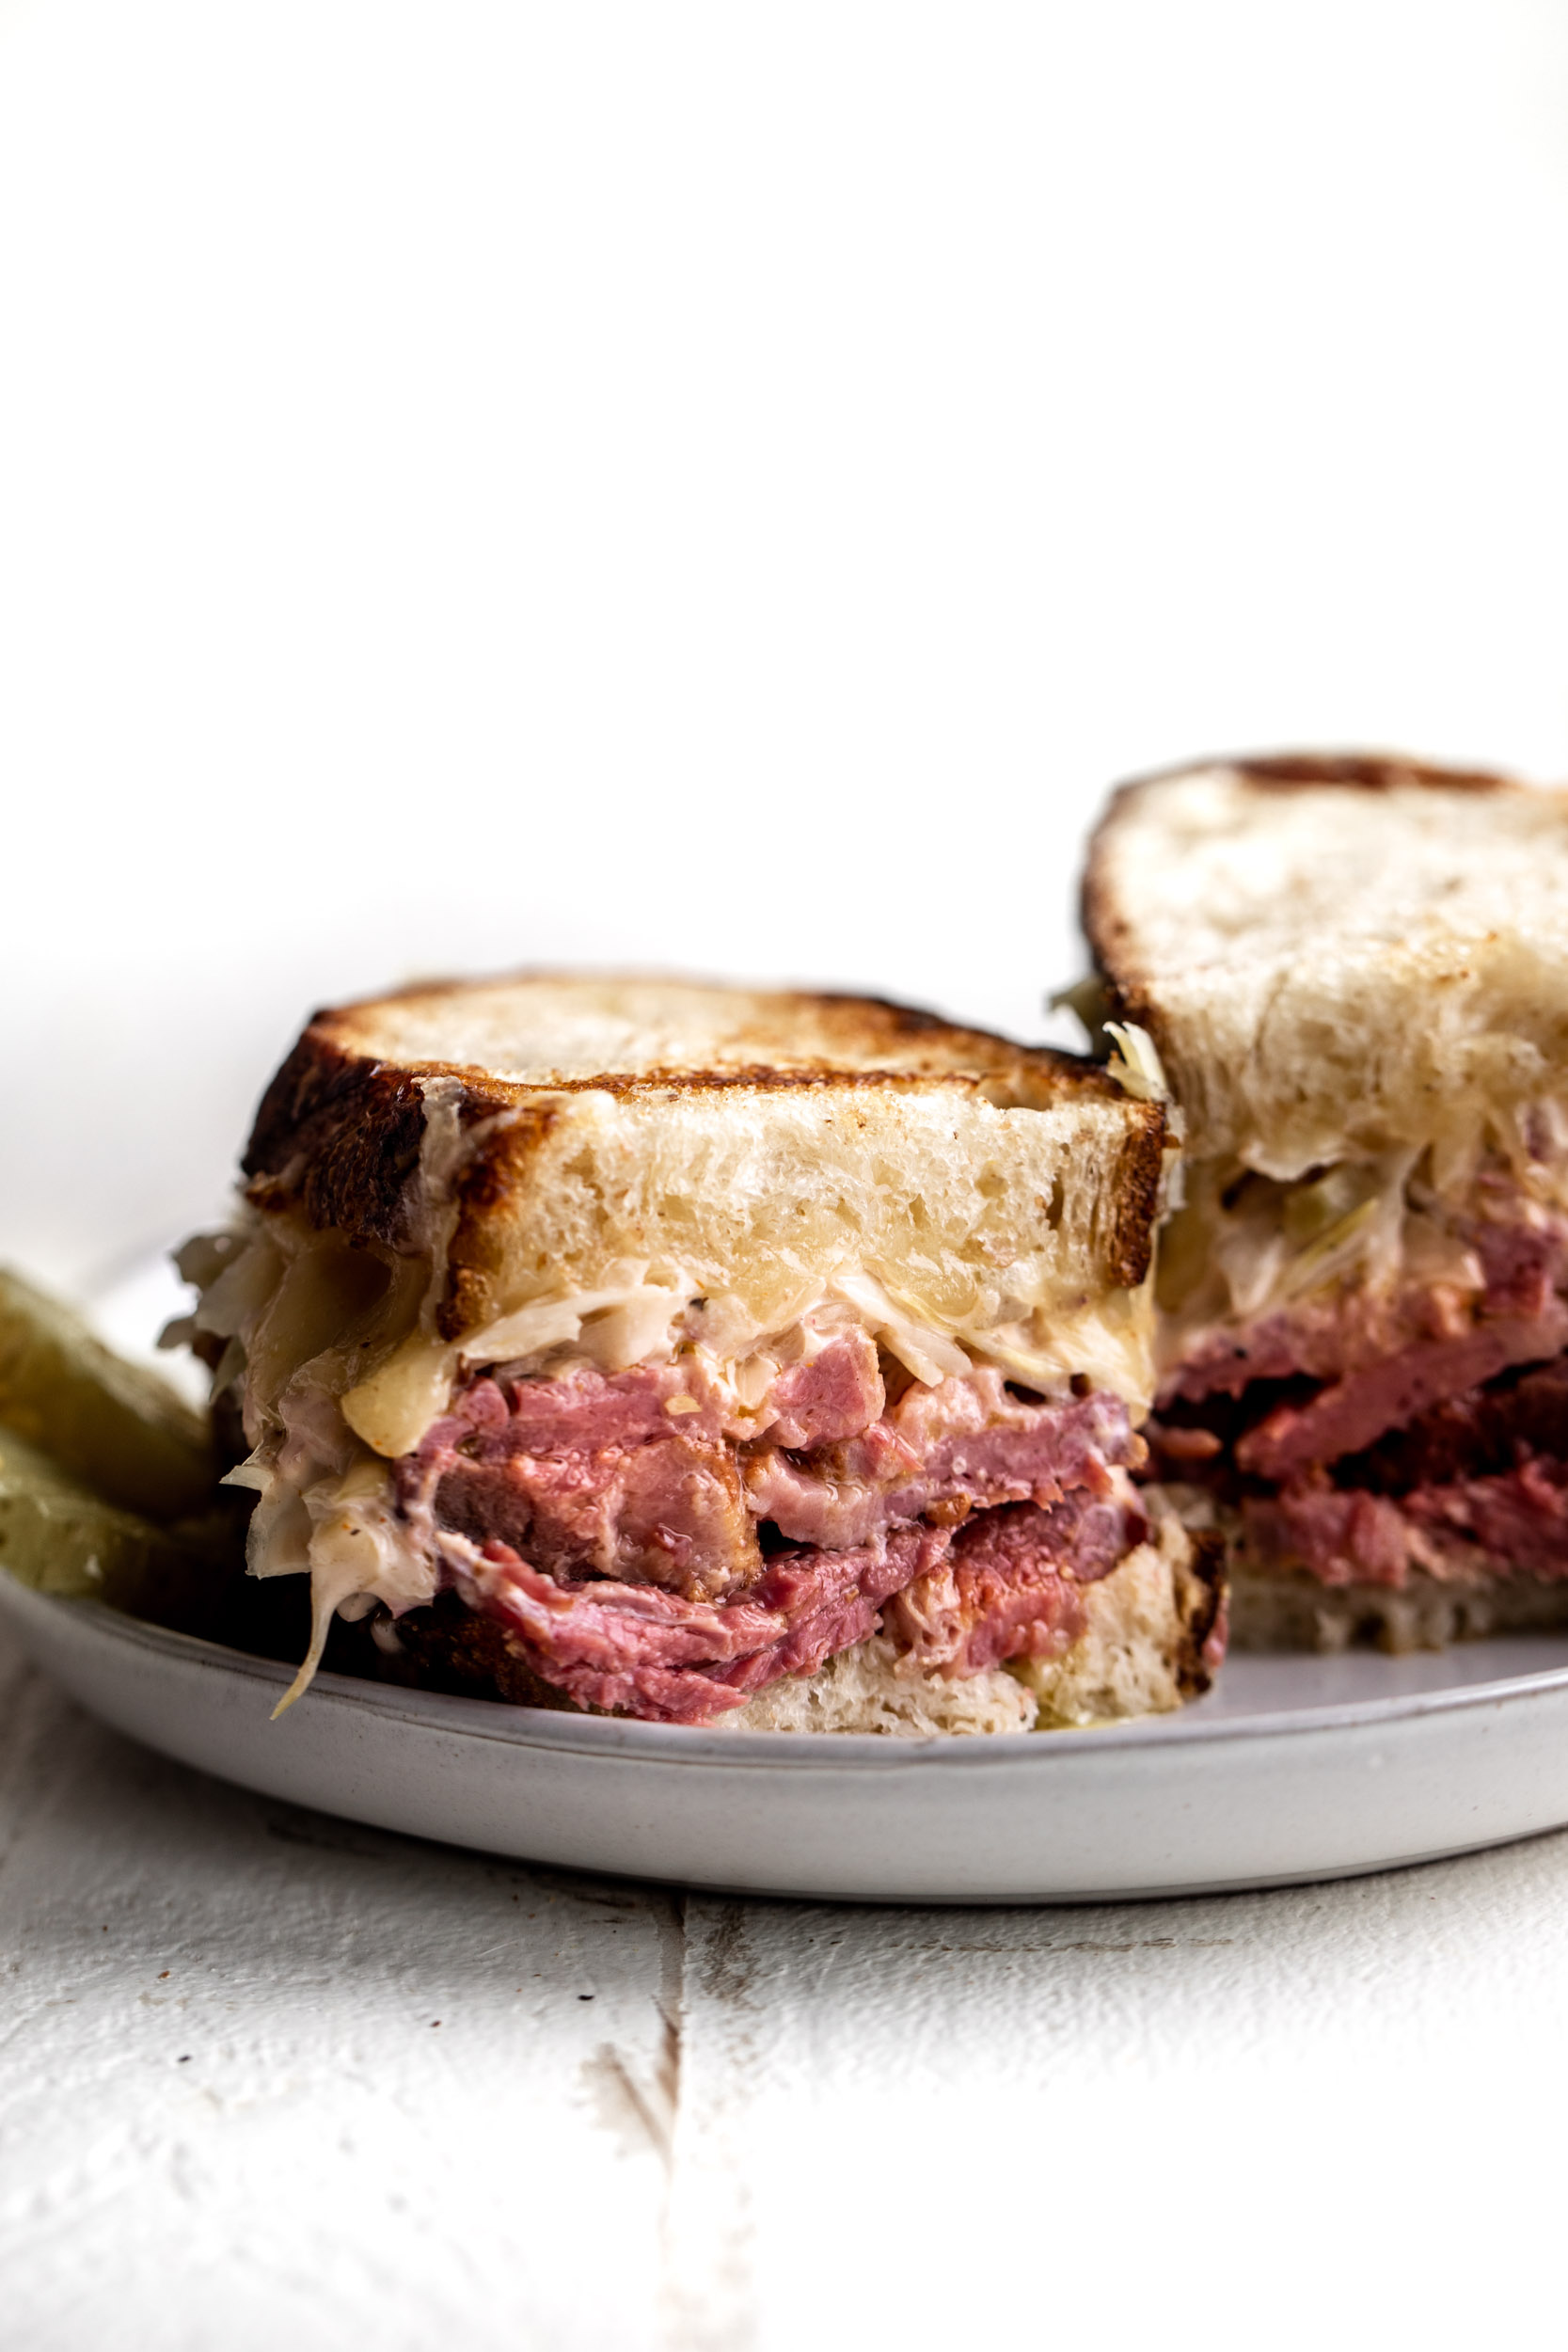 Classic Reuben sandwich with slices of corned beef on sliced dark rye bread with sliced Swiss cheese and sauerkraut